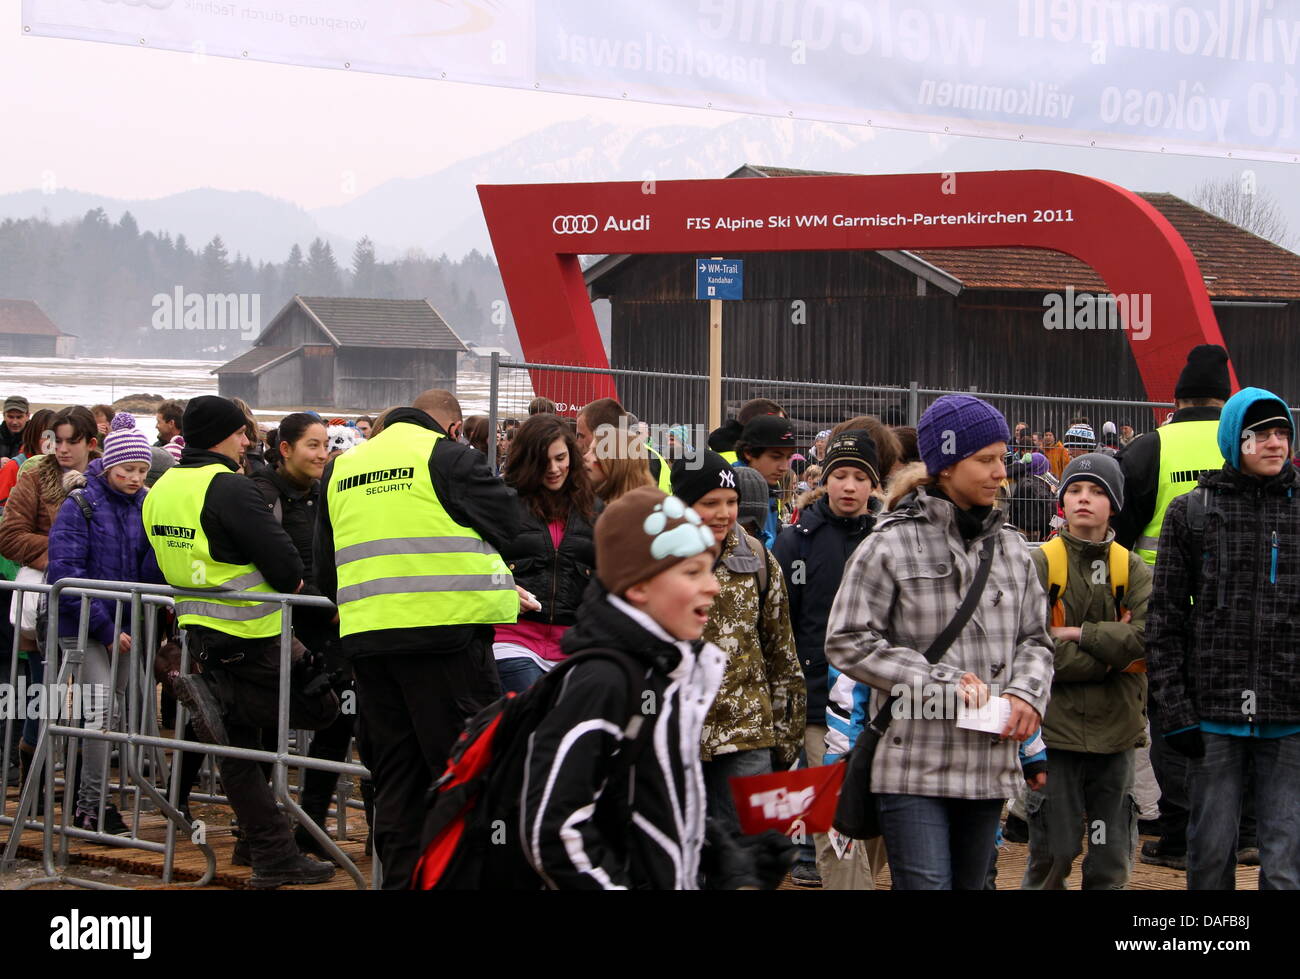 Spectators are searched at a security checkpoint before entering the Kandahar Arena during the Alpine Skiing World Cup 2011, in Garmisch-Partenkirchen, Germany, 16 February 2011. Photo: Stephan Jansen Stock Photo